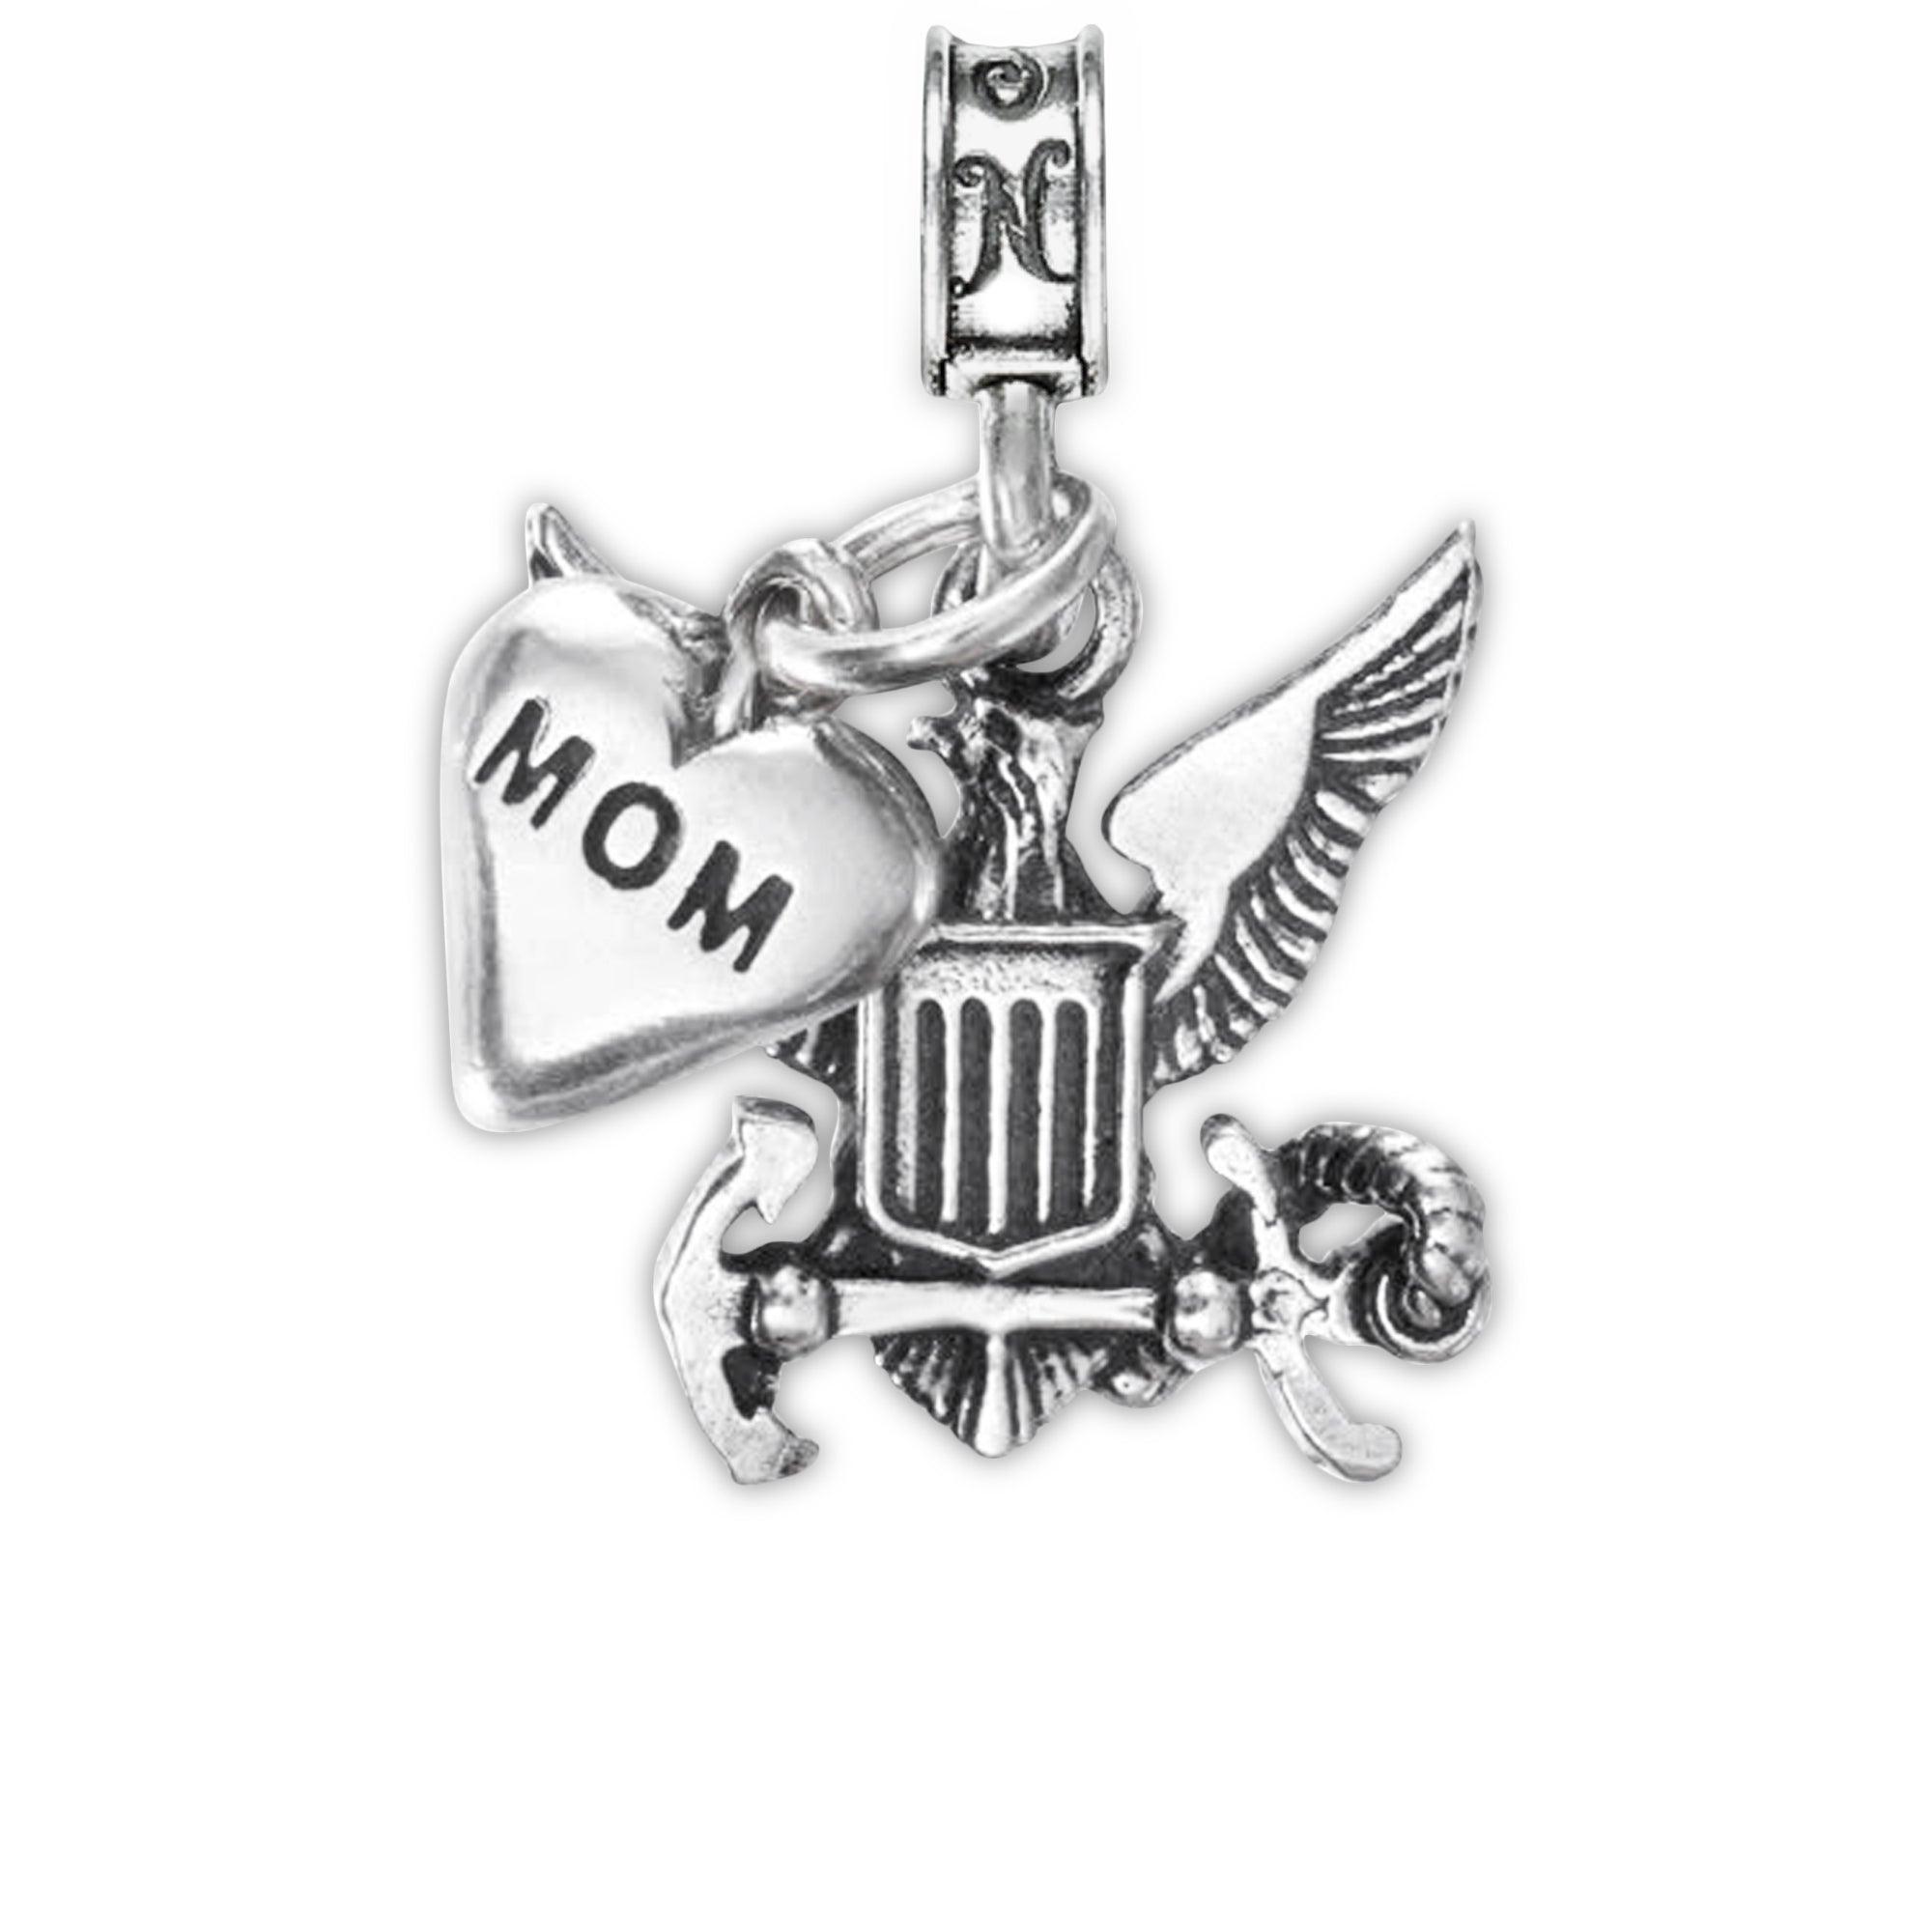 Military Jewelry, Military Charms, Military Gifts, USAF, United States Air Force, Navy Emblem, Navy Mom